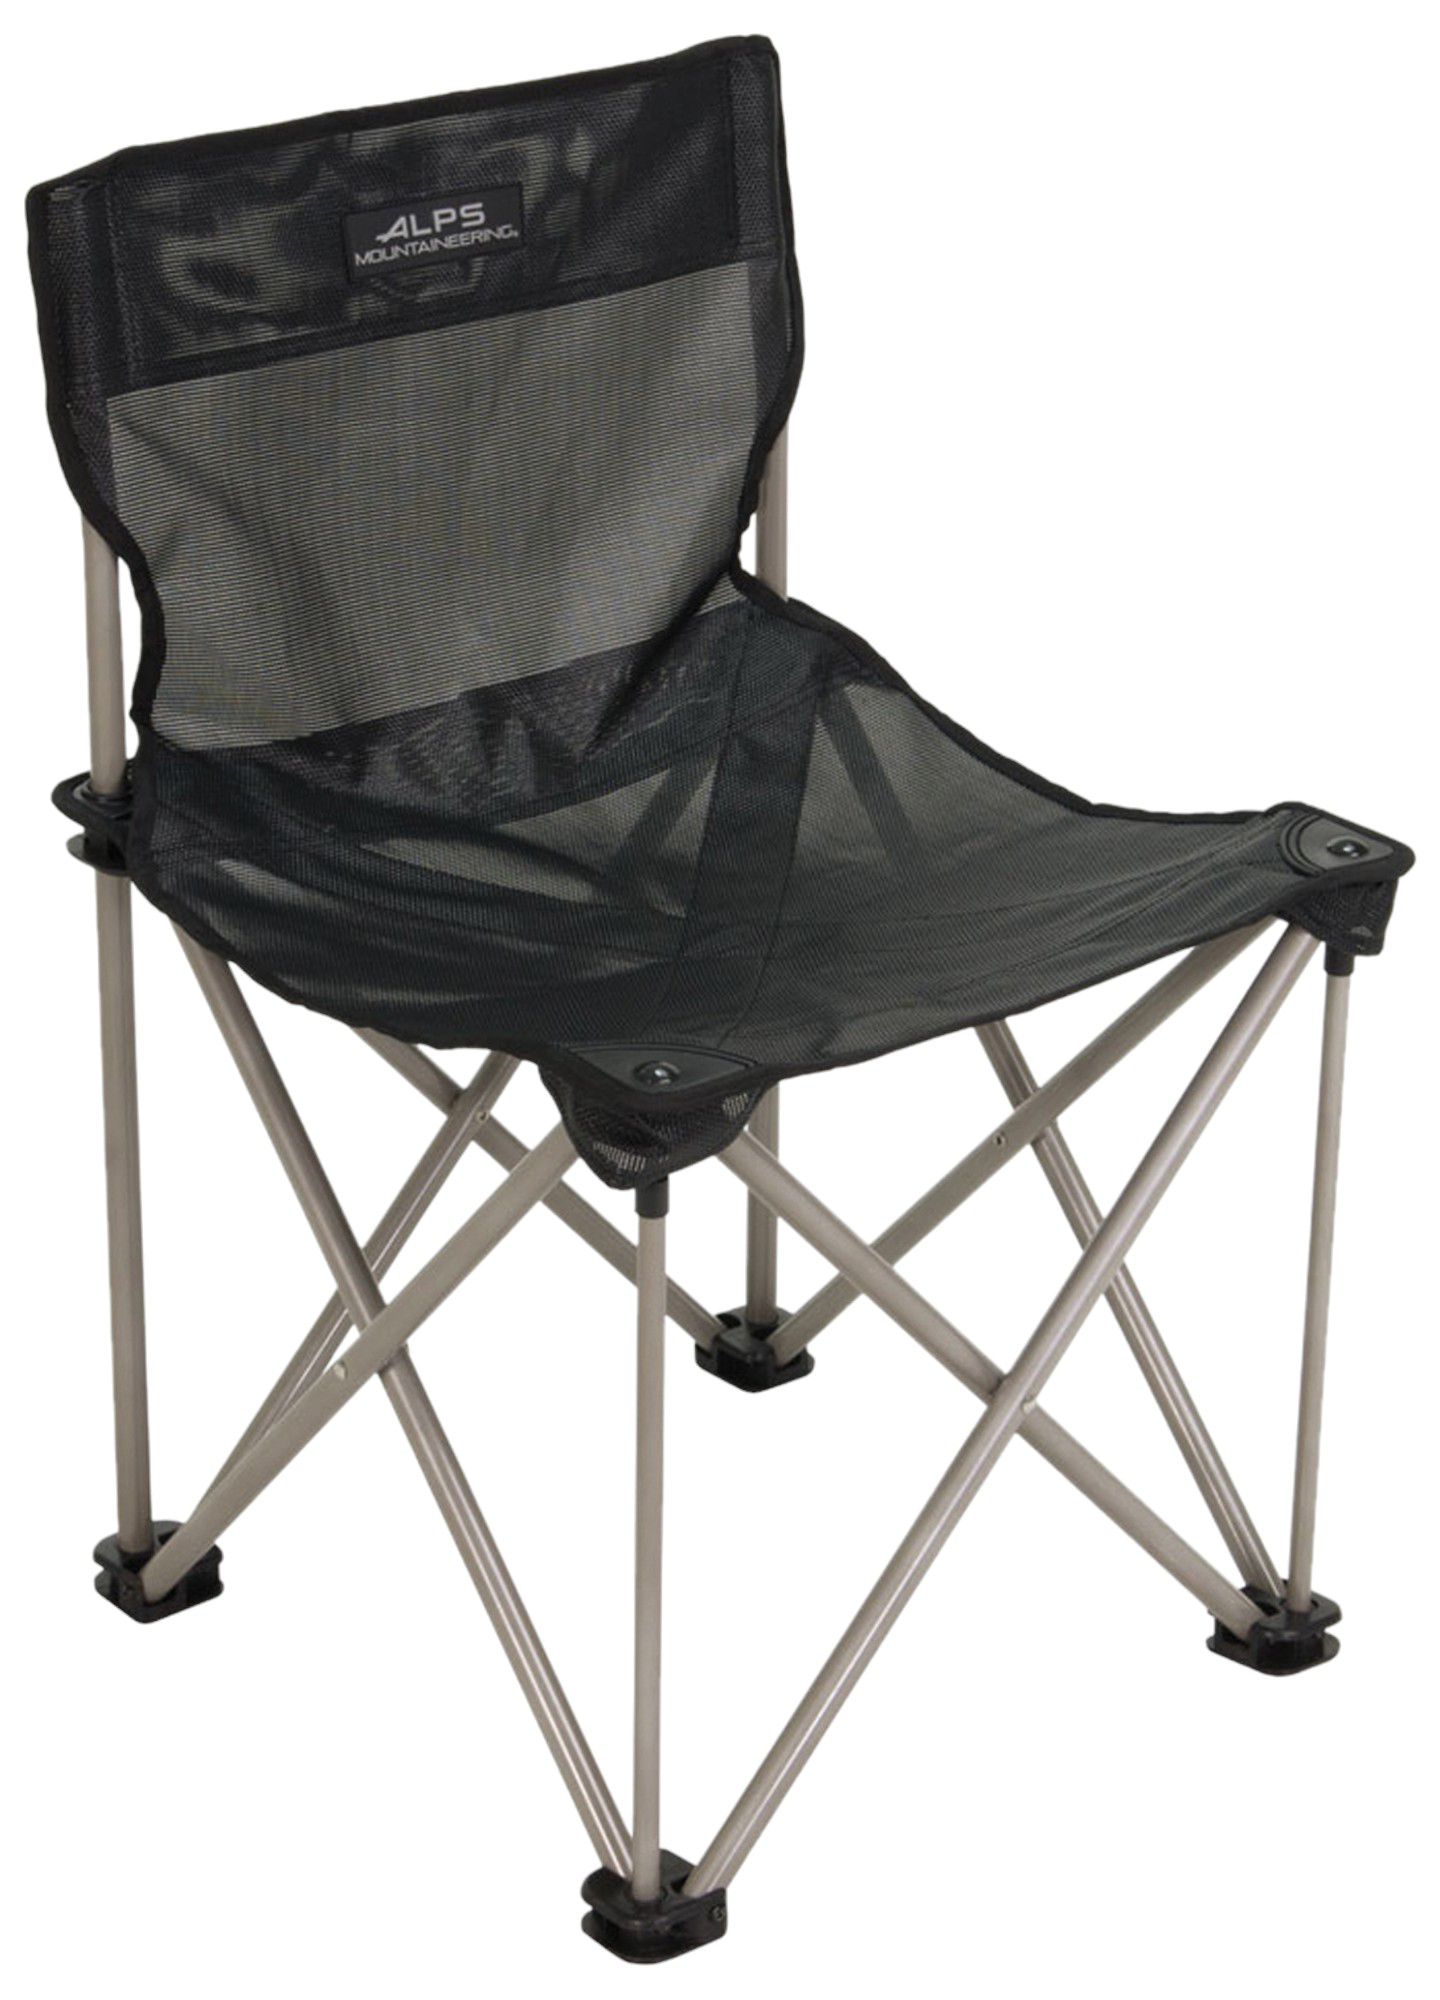 Photos - Other goods for tourism ALPS Mountaineering Adventure Chair, Charcoal 23AMOUDVNTRCHRS19REC 